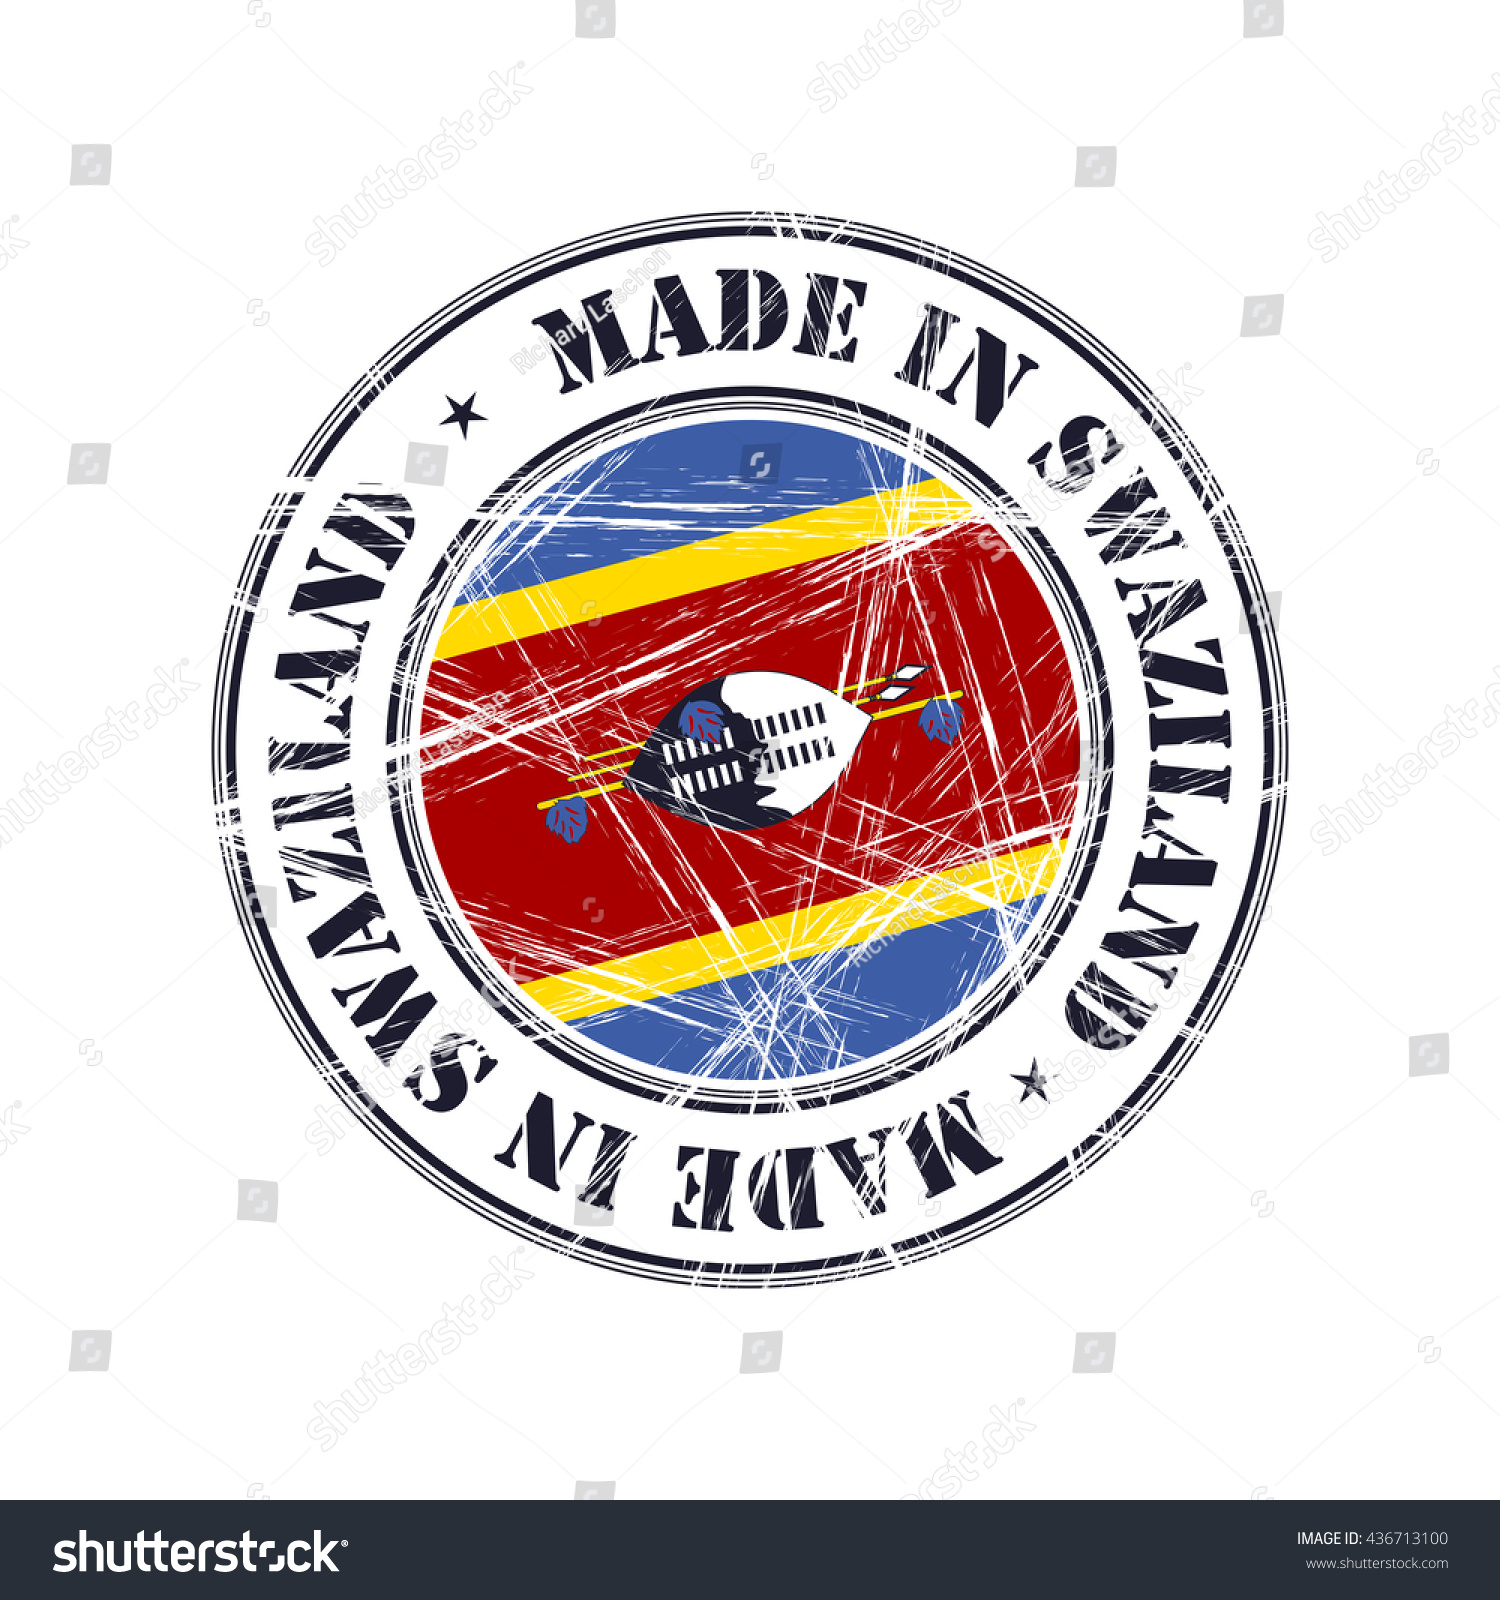 Made Swaziland Grunge Rubber Stamp Flag Stock Vector 436713100 ...